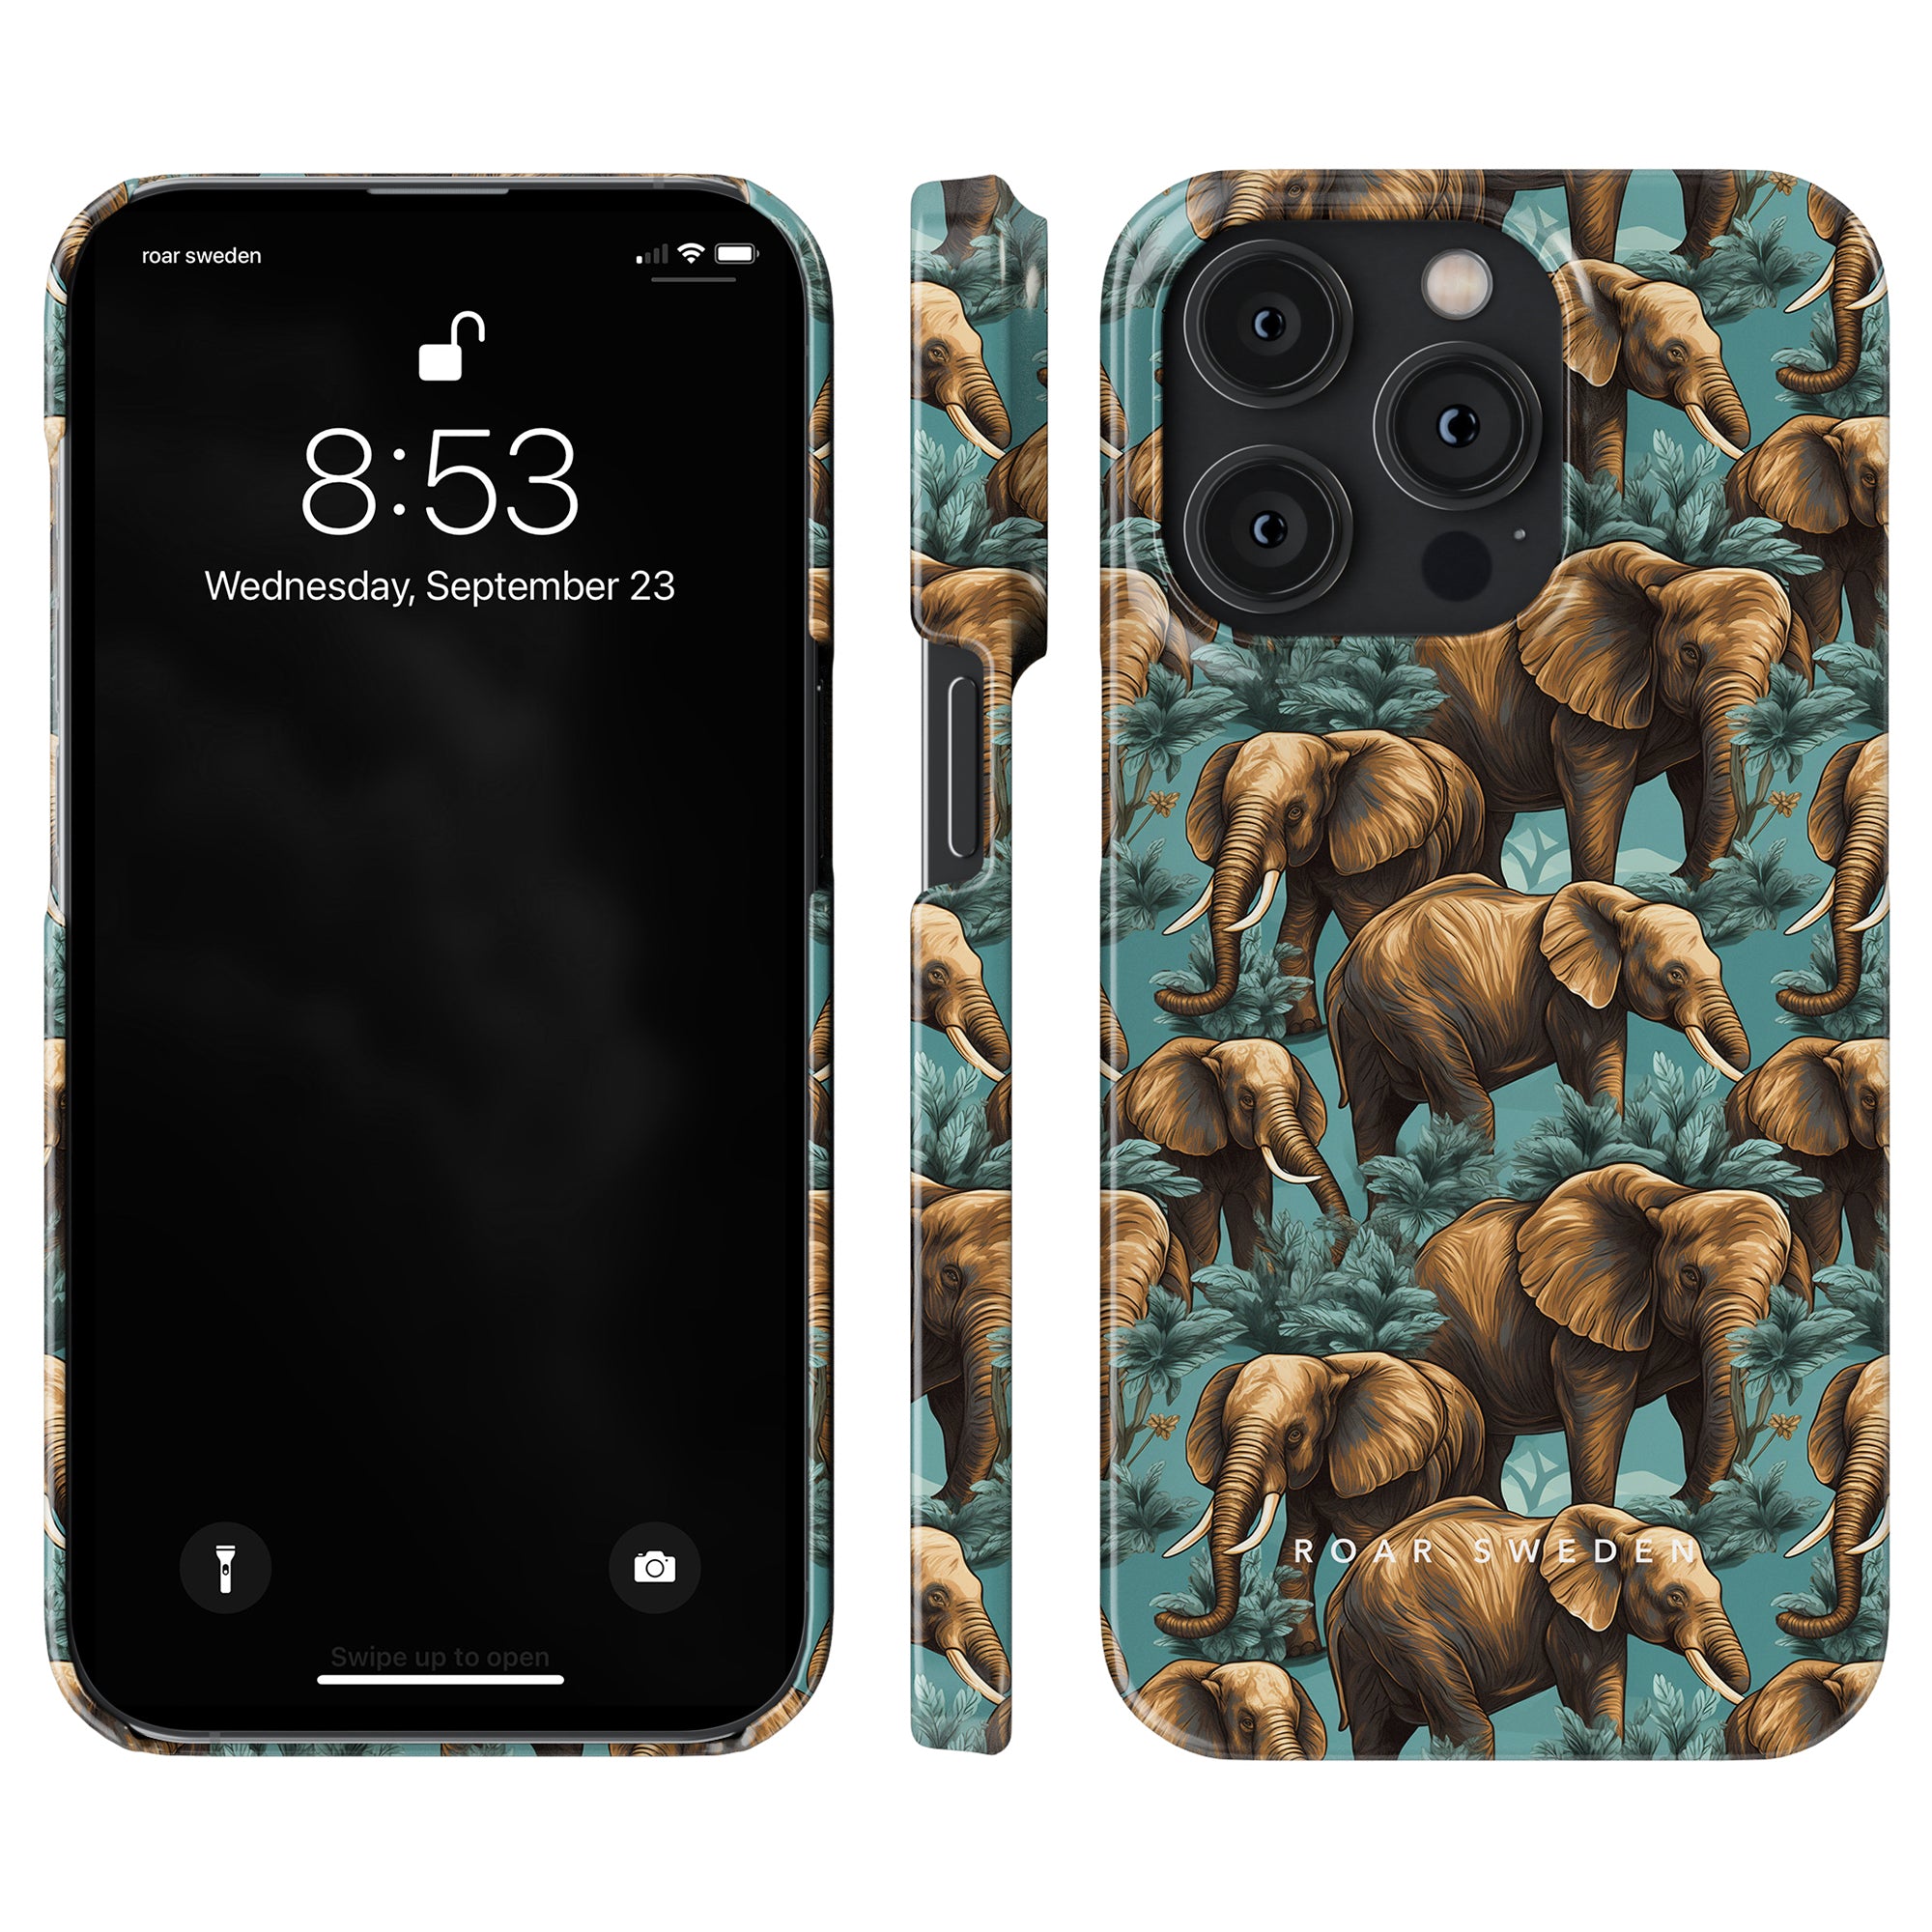 Discover the Hathi - Slim case from our Safari Collection, showcasing a vibrant green background dotted with multiple elephants. The smartphone is displayed from the front and back, with the screen showing 8:53 and Wednesday, September 23. Elevate your style with elefantdesign elegance.